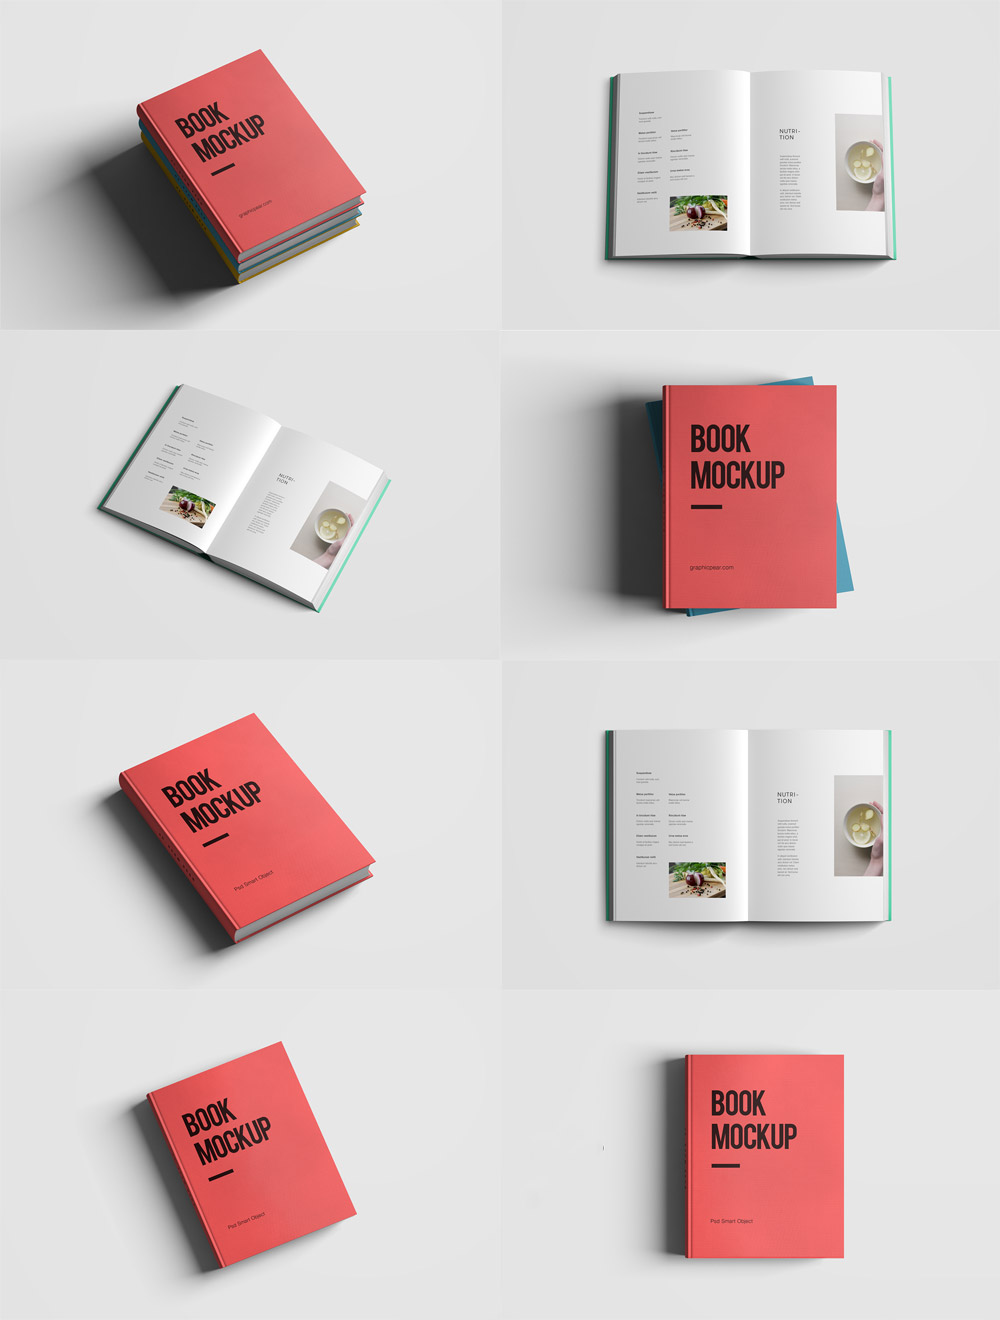 Download Realistic Book Mockup Template Pack Free PSD - Download PSD PSD Mockup Templates